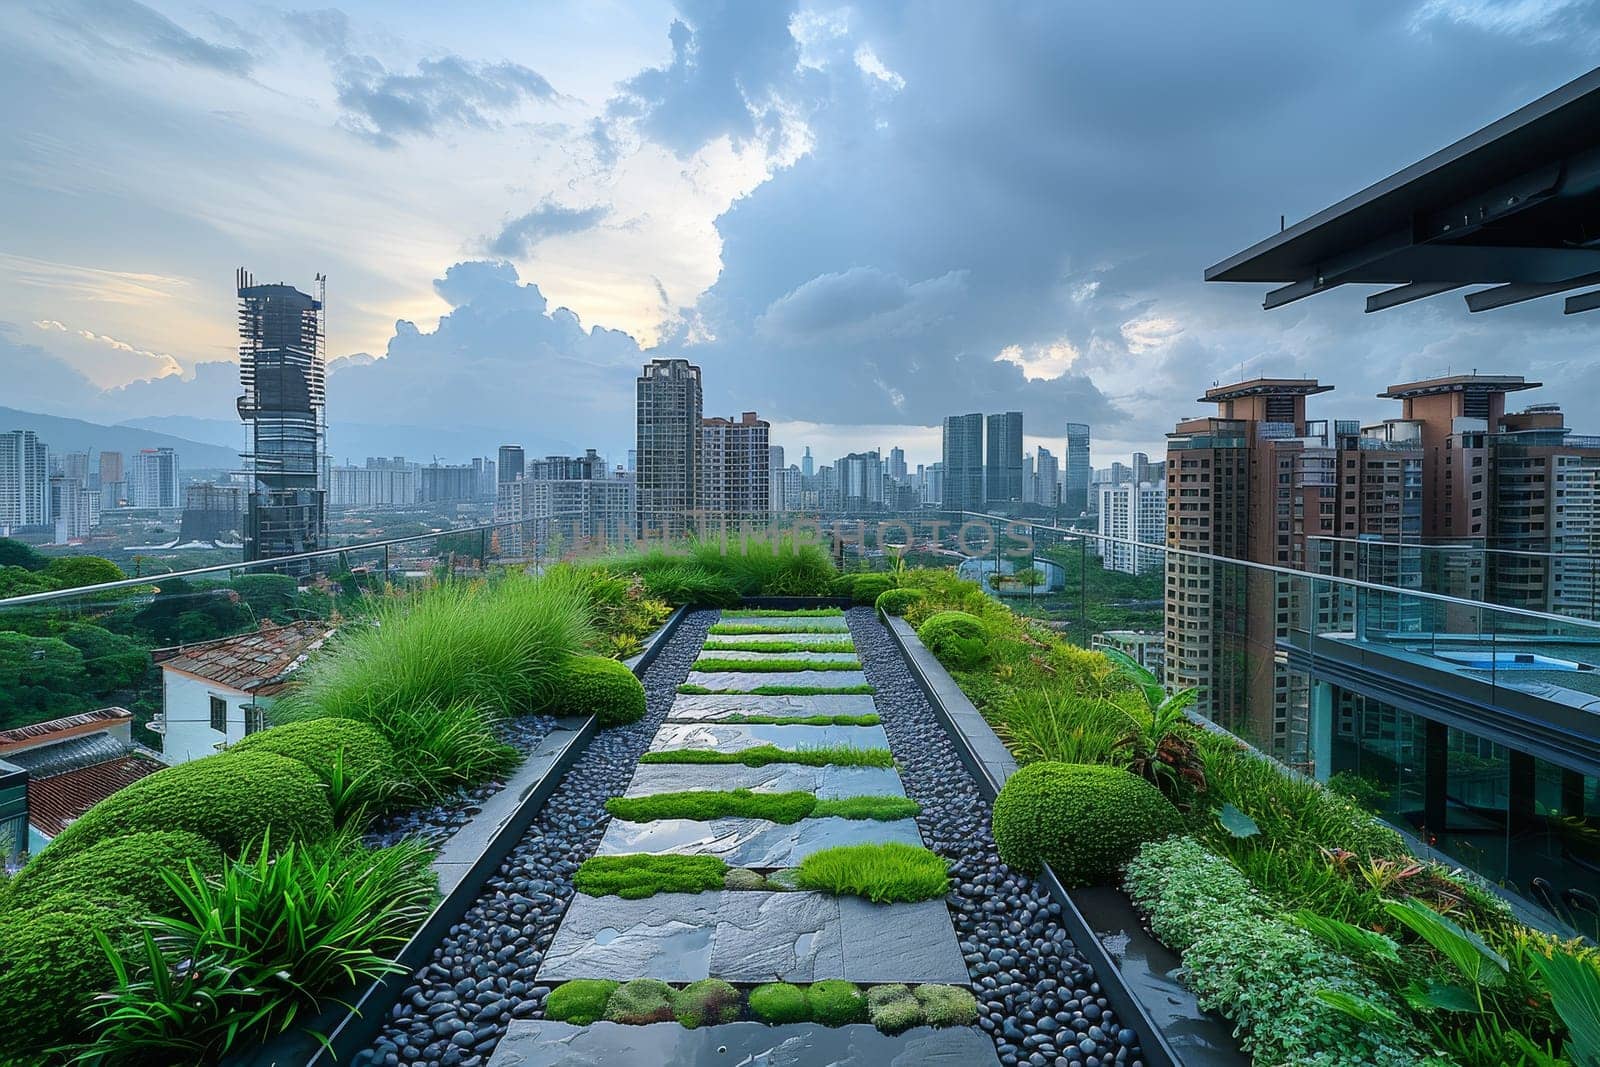 A cityscape with a rooftop garden filled with various vegetables and plants by itchaznong